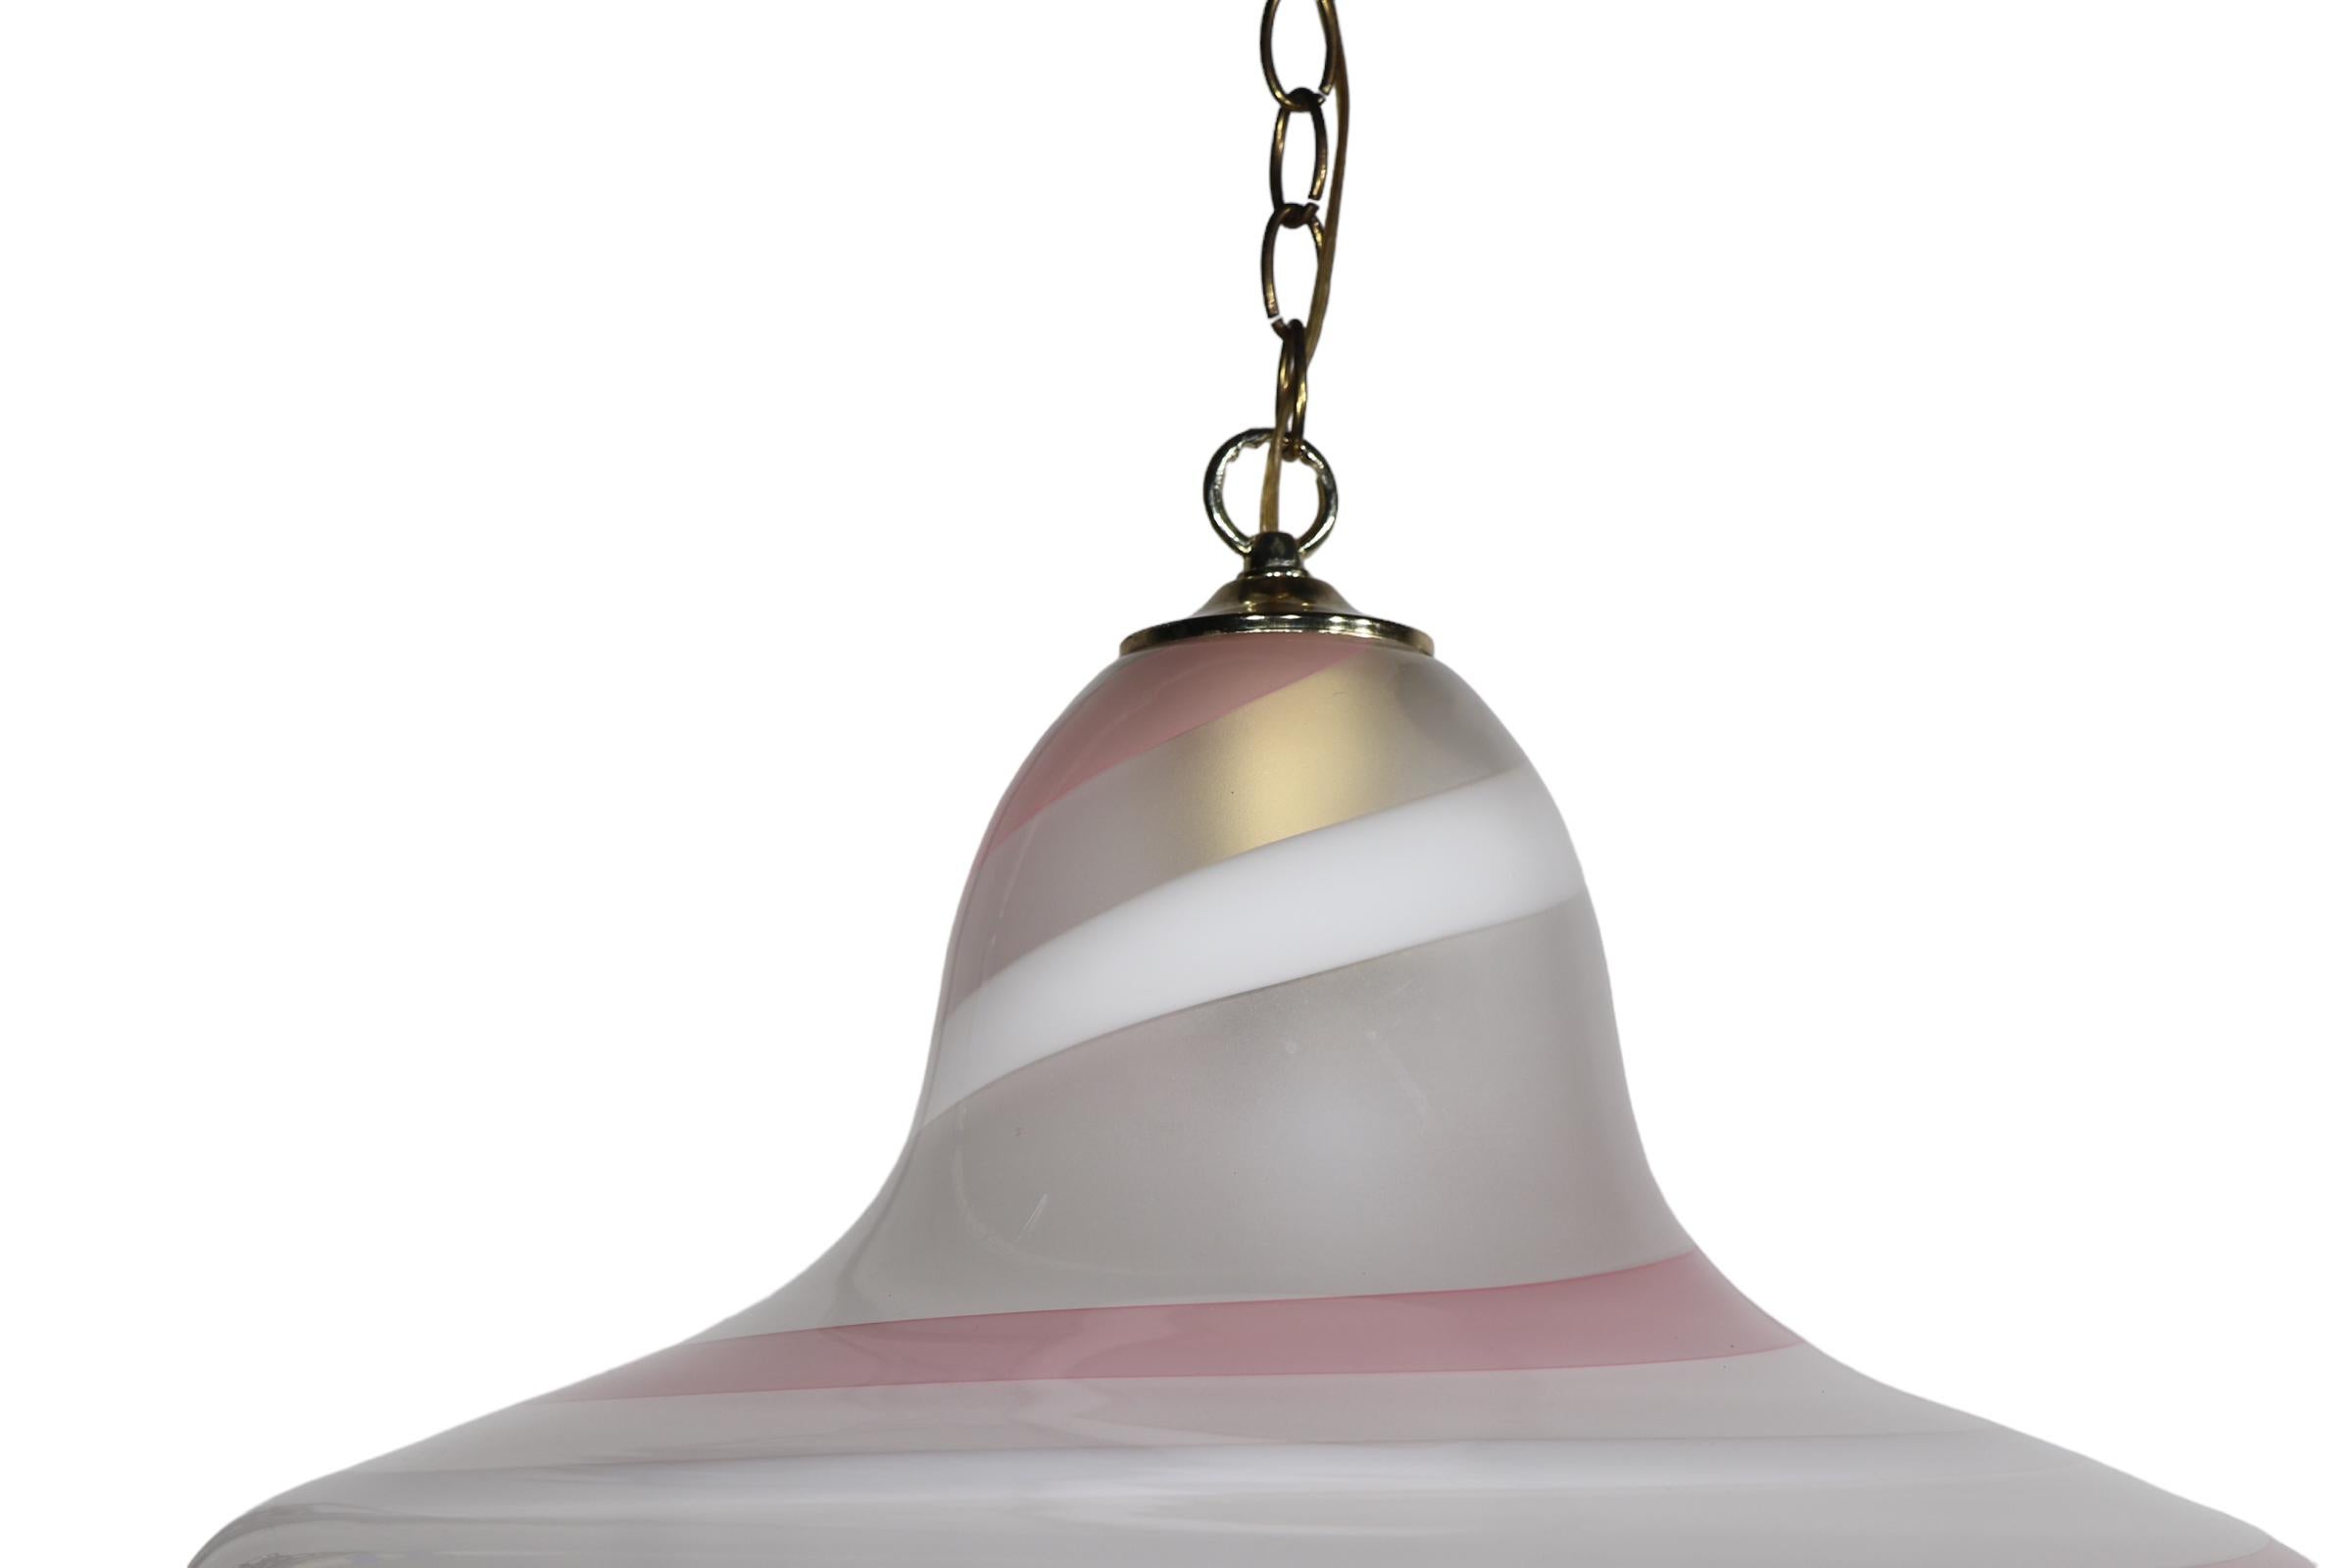 Chic, voguish bell, or hat form art glass chandelier, made in Murano, Italy circa 1970/1980's. The soft pink, cream, gold and soft gray tones executed in an elegant swirl pattern create an elegant and sophisticated look, which is especially